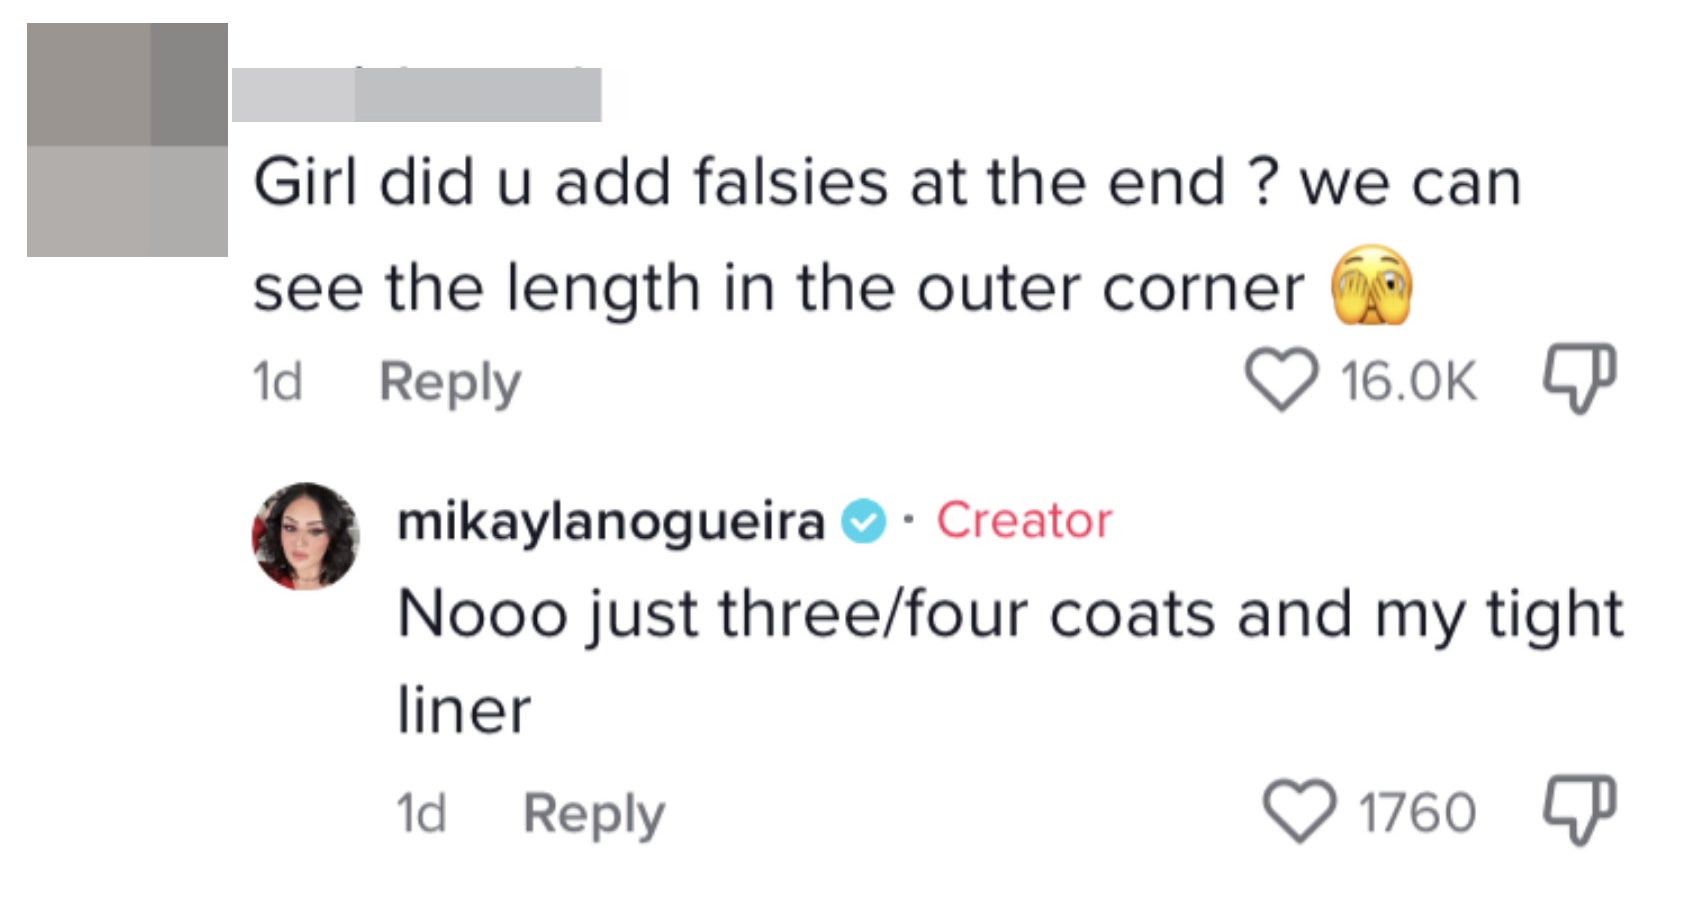 Mikayla responded to an accusation by saying she only applied &quot;just three/four coats&quot;